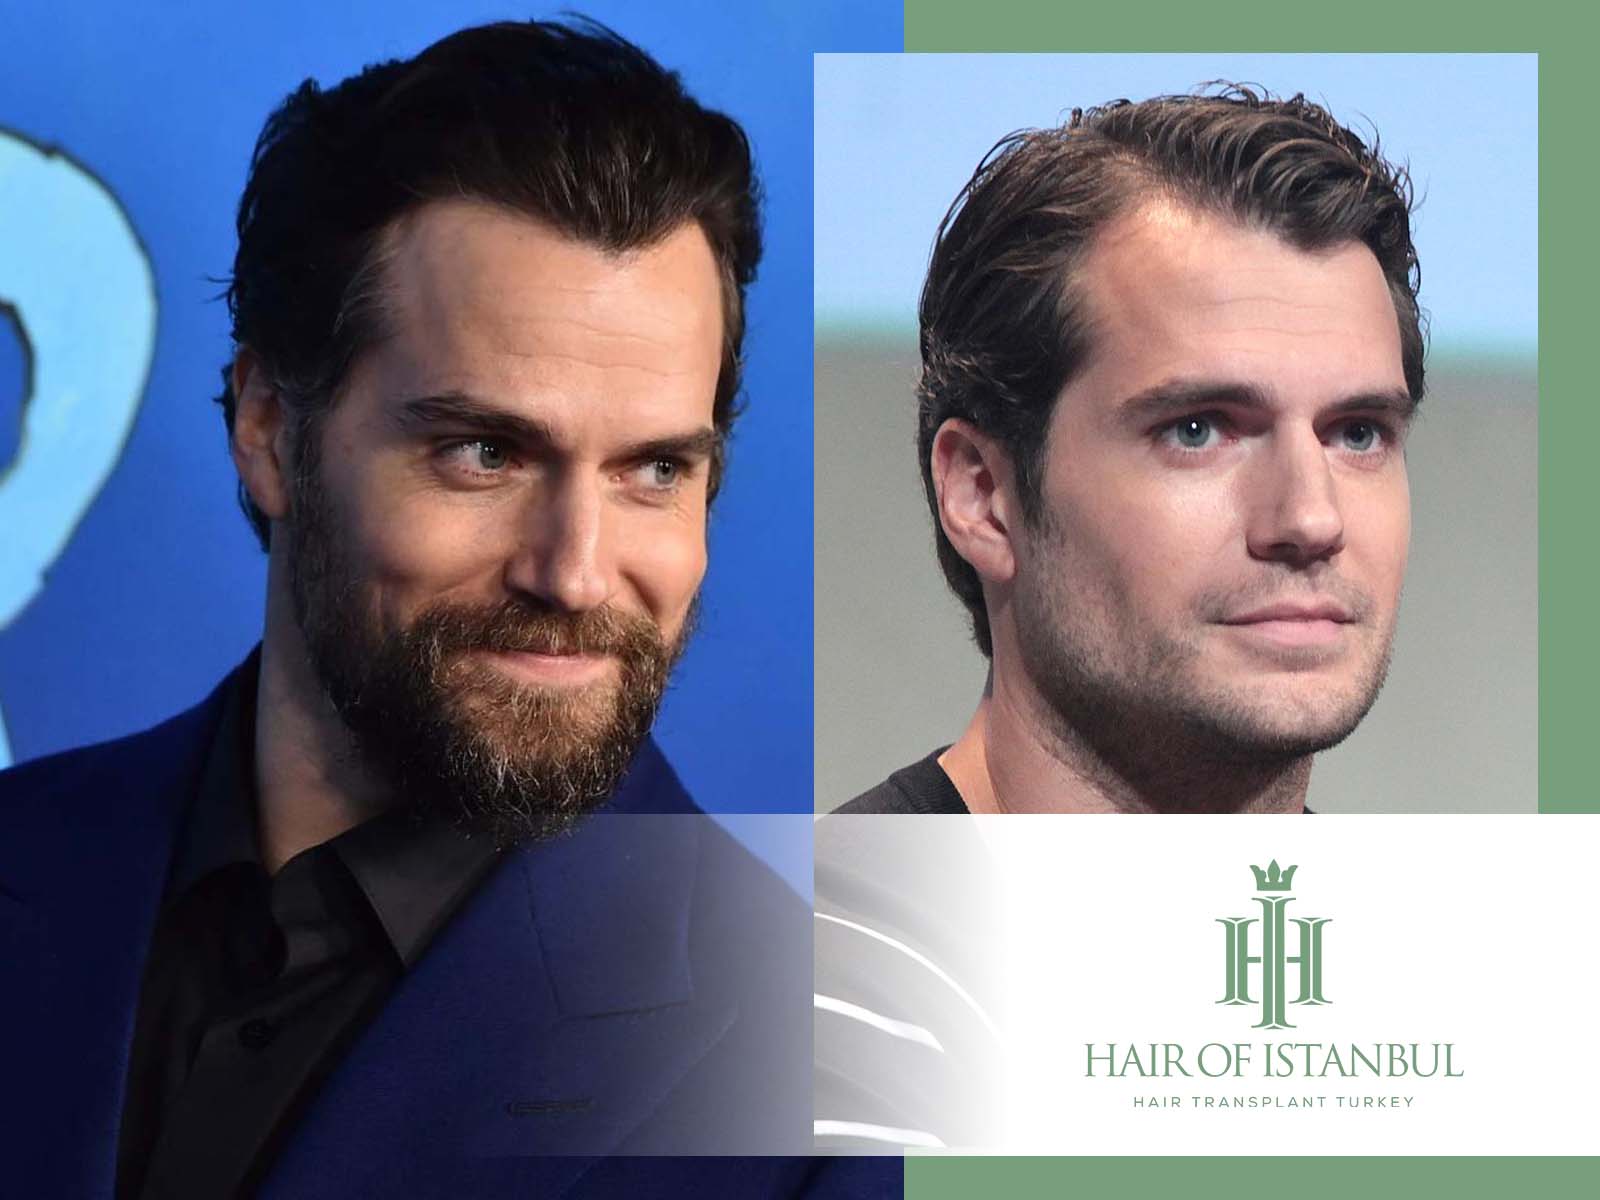 Henry Cavill Hair Transplant: From Superman to Super Hair